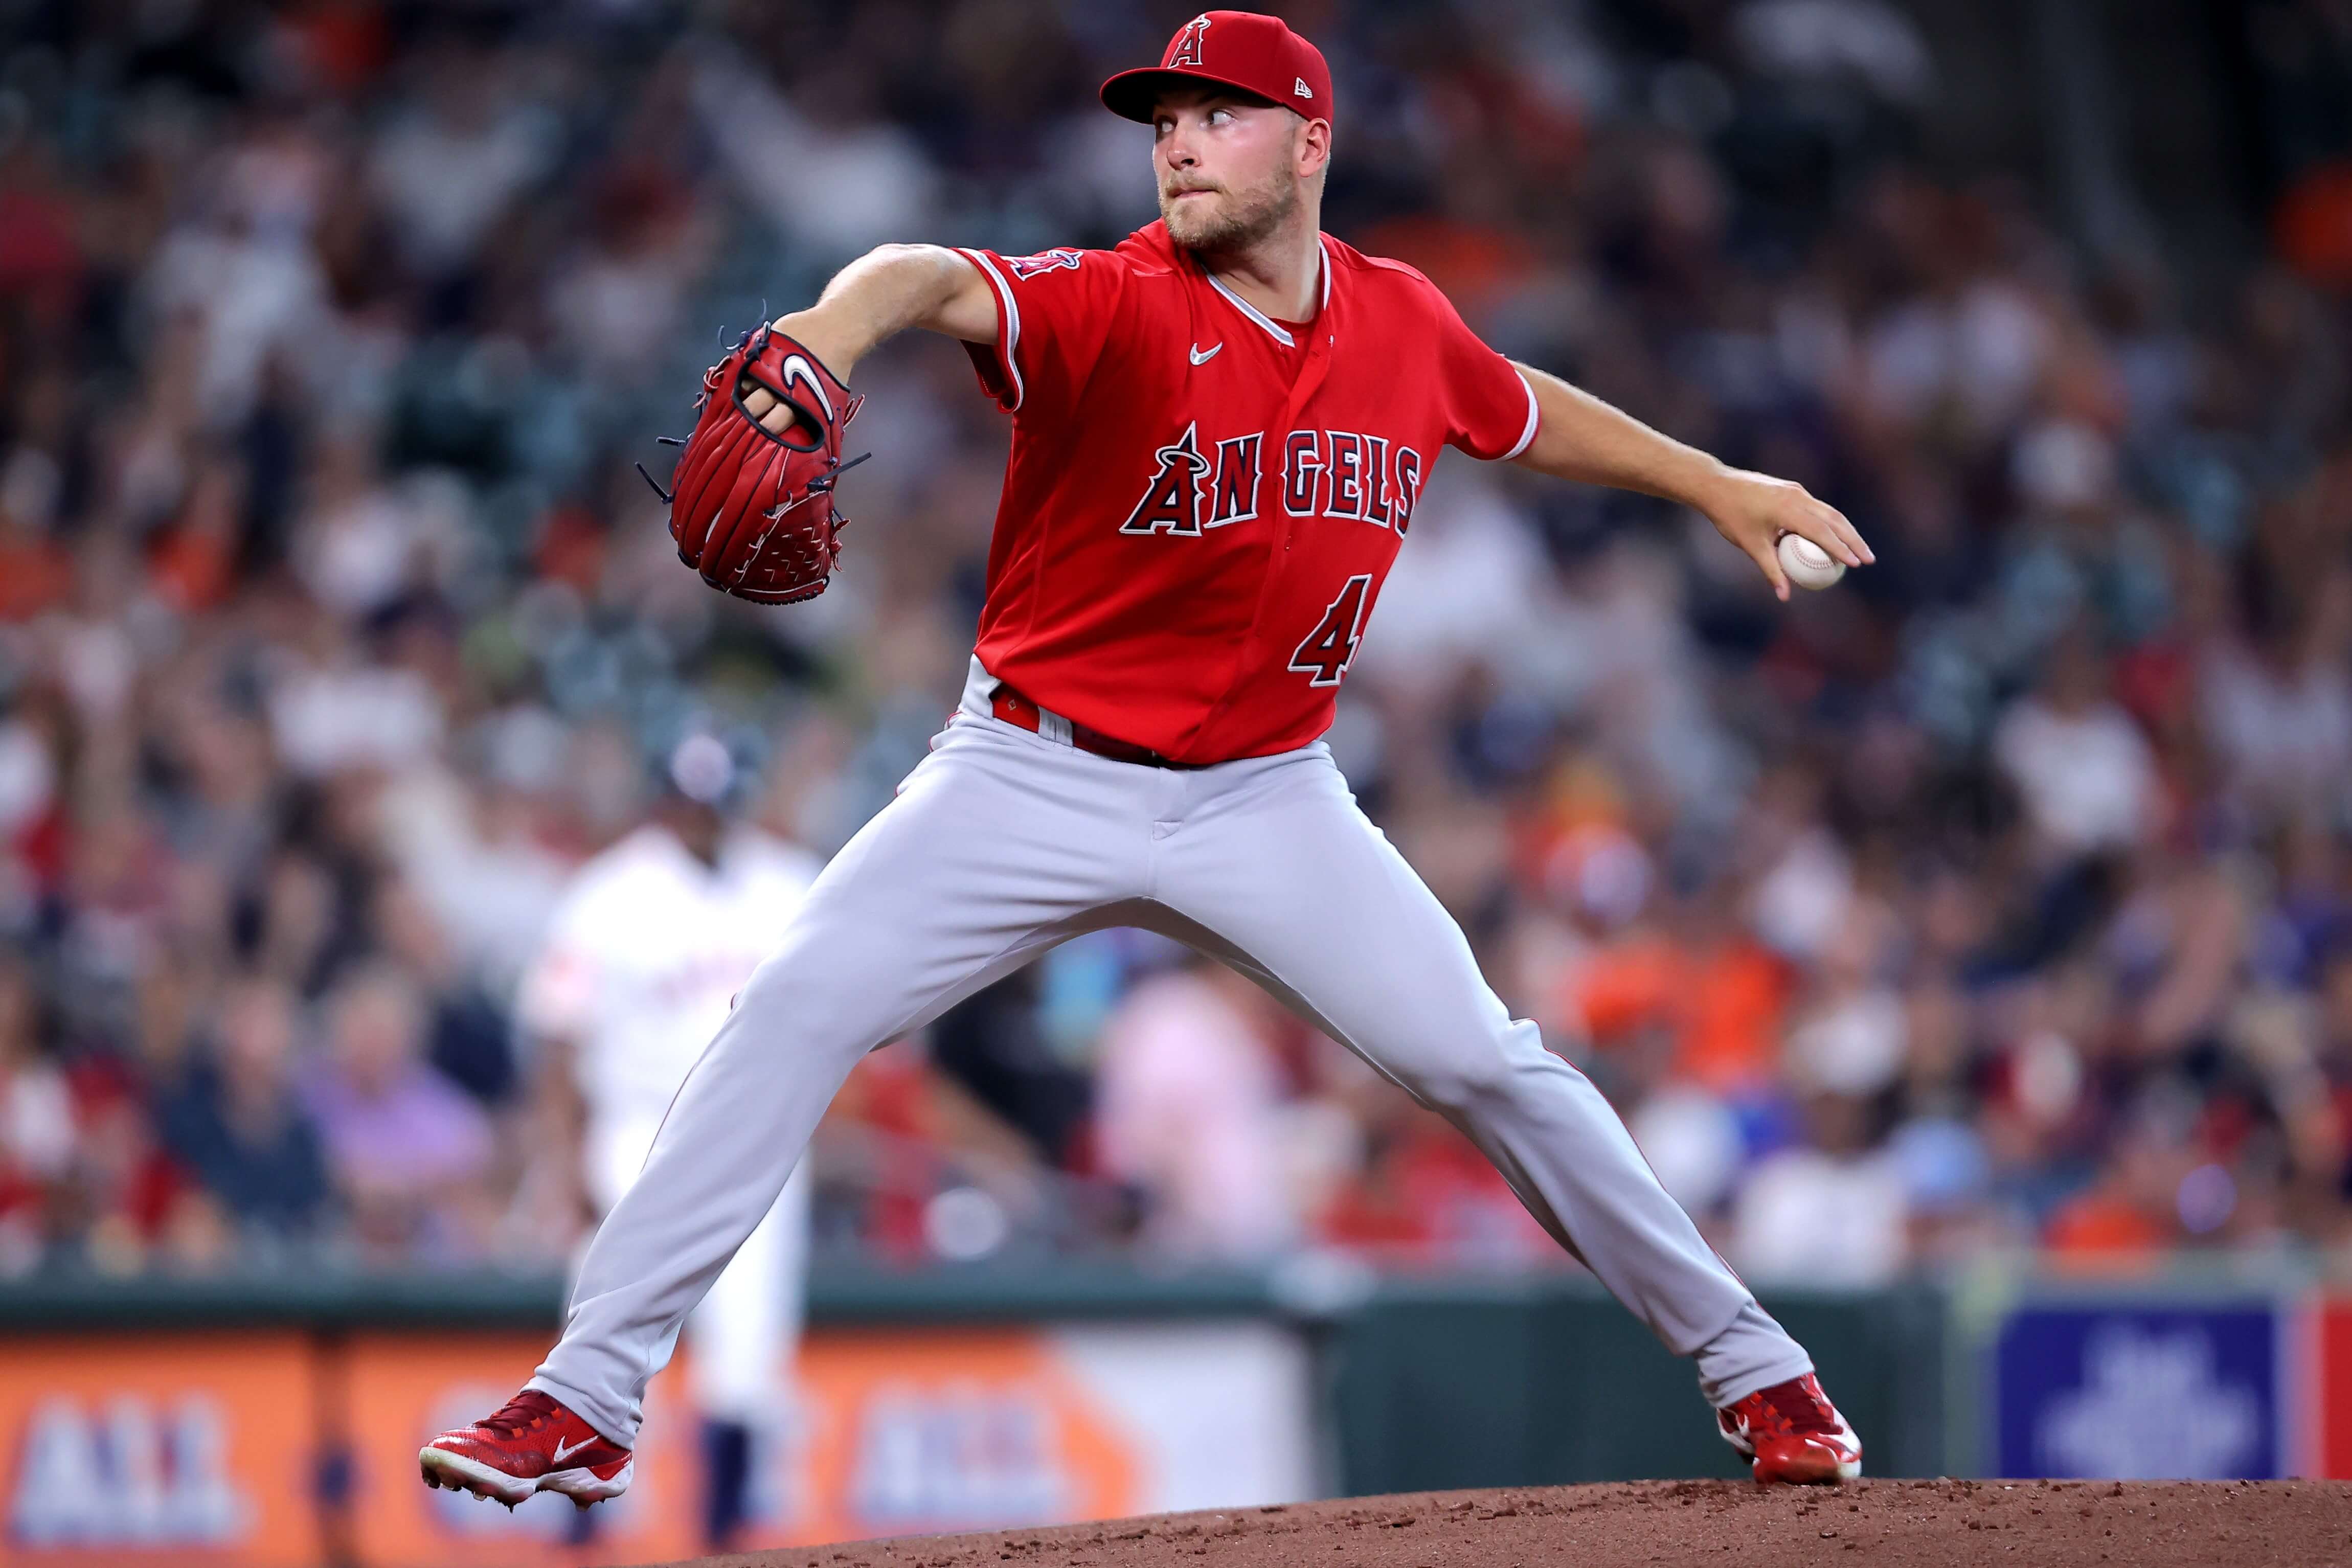 Cubs vs Angels Predictions, Picks, Odds: Third Time's Not a Charm for Detmers